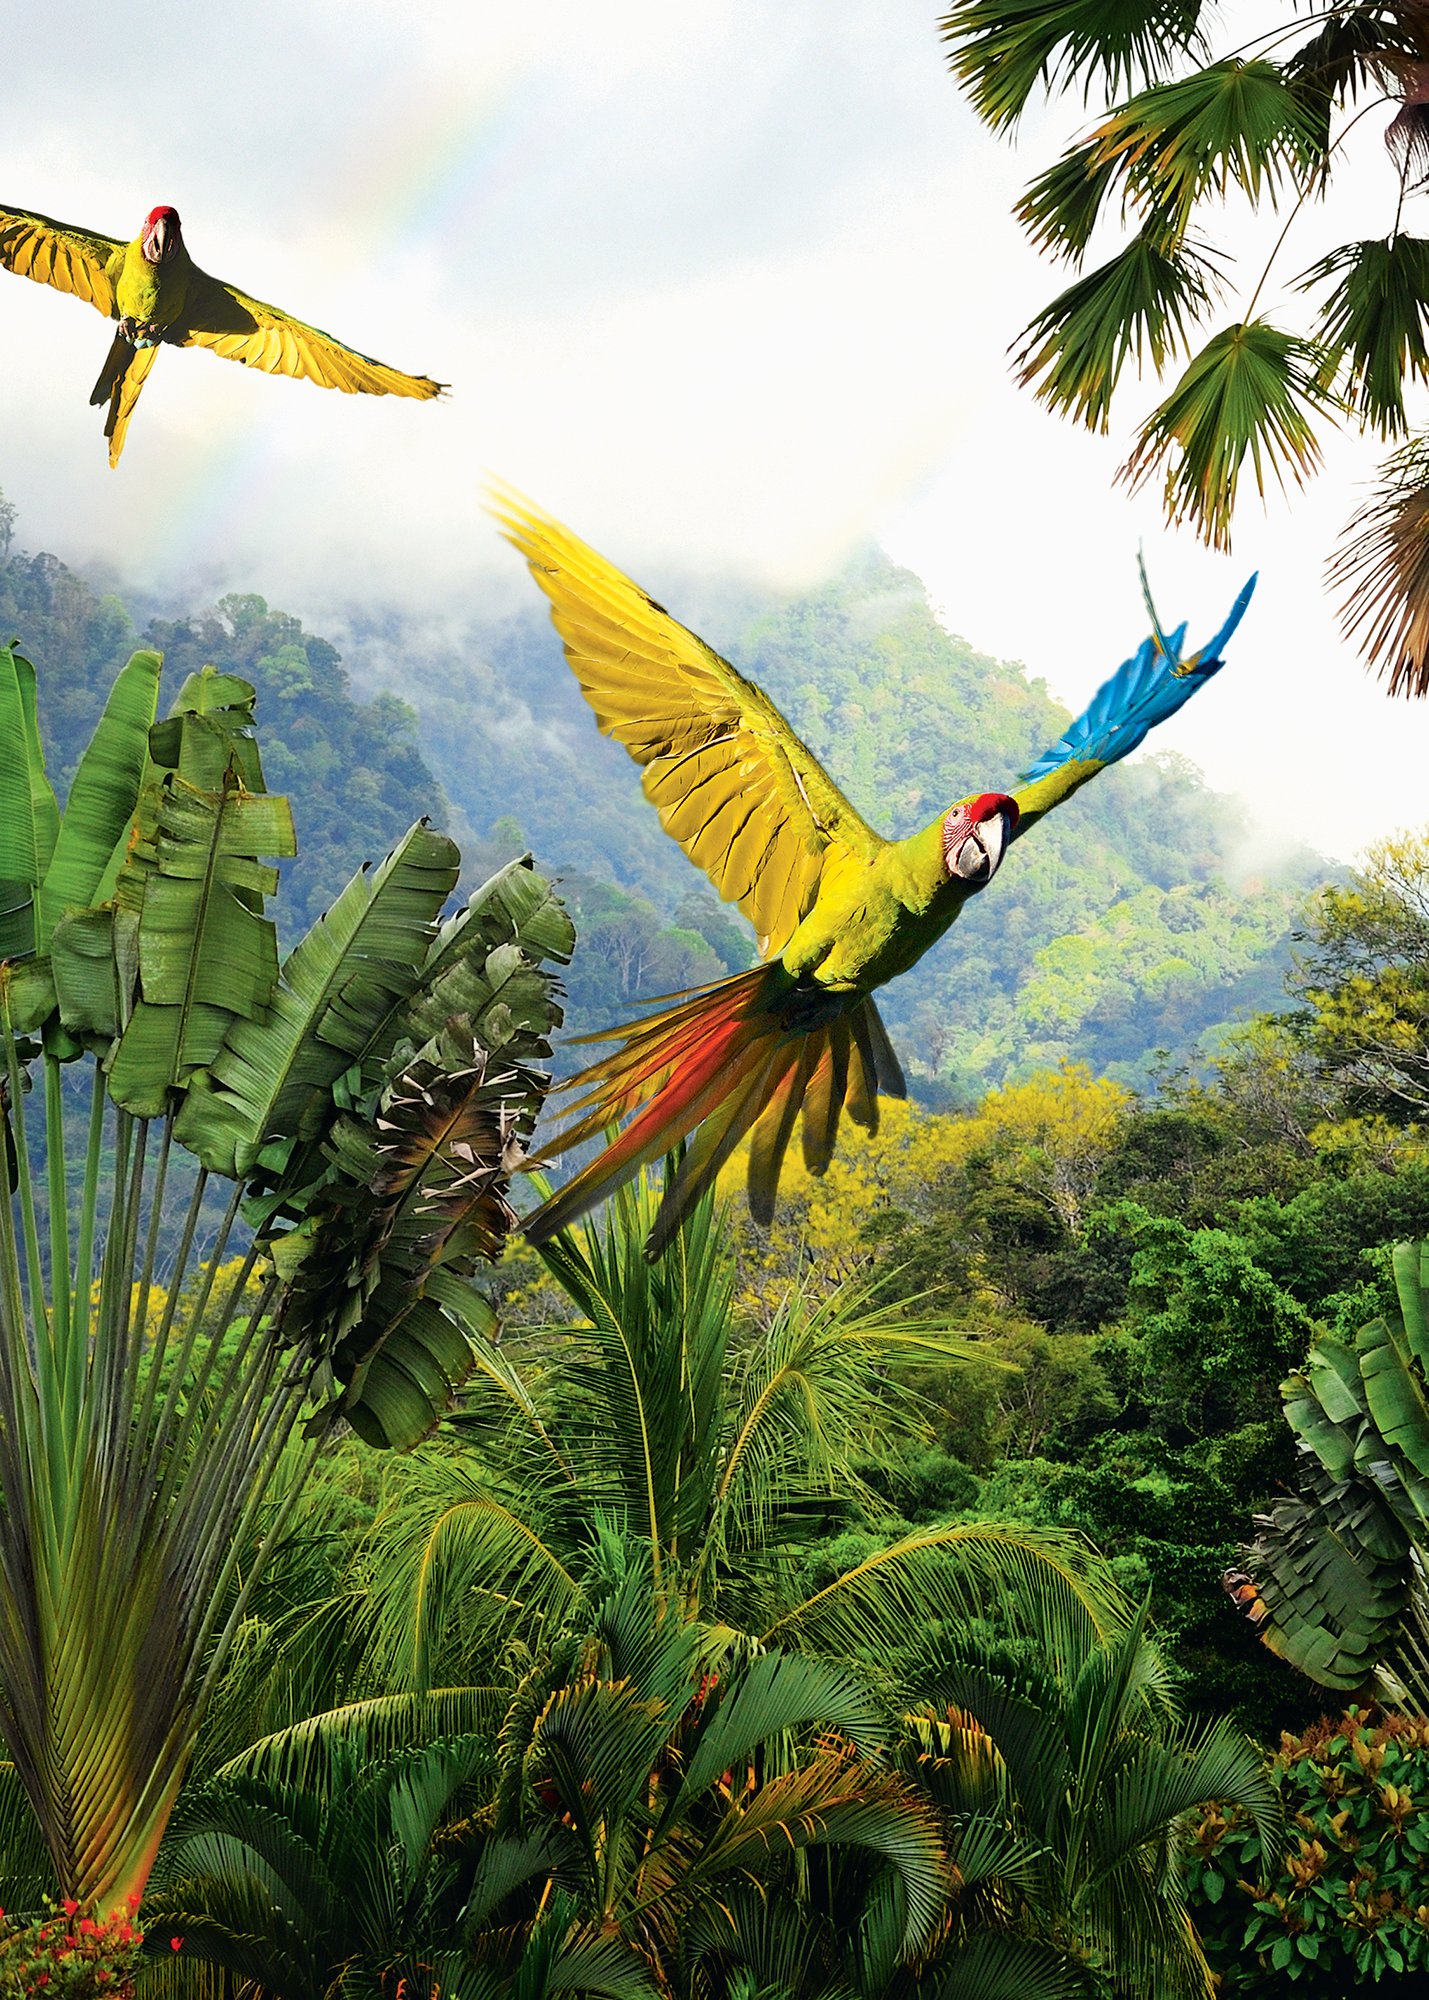 Nature is anything but reserved in Costa Rica.